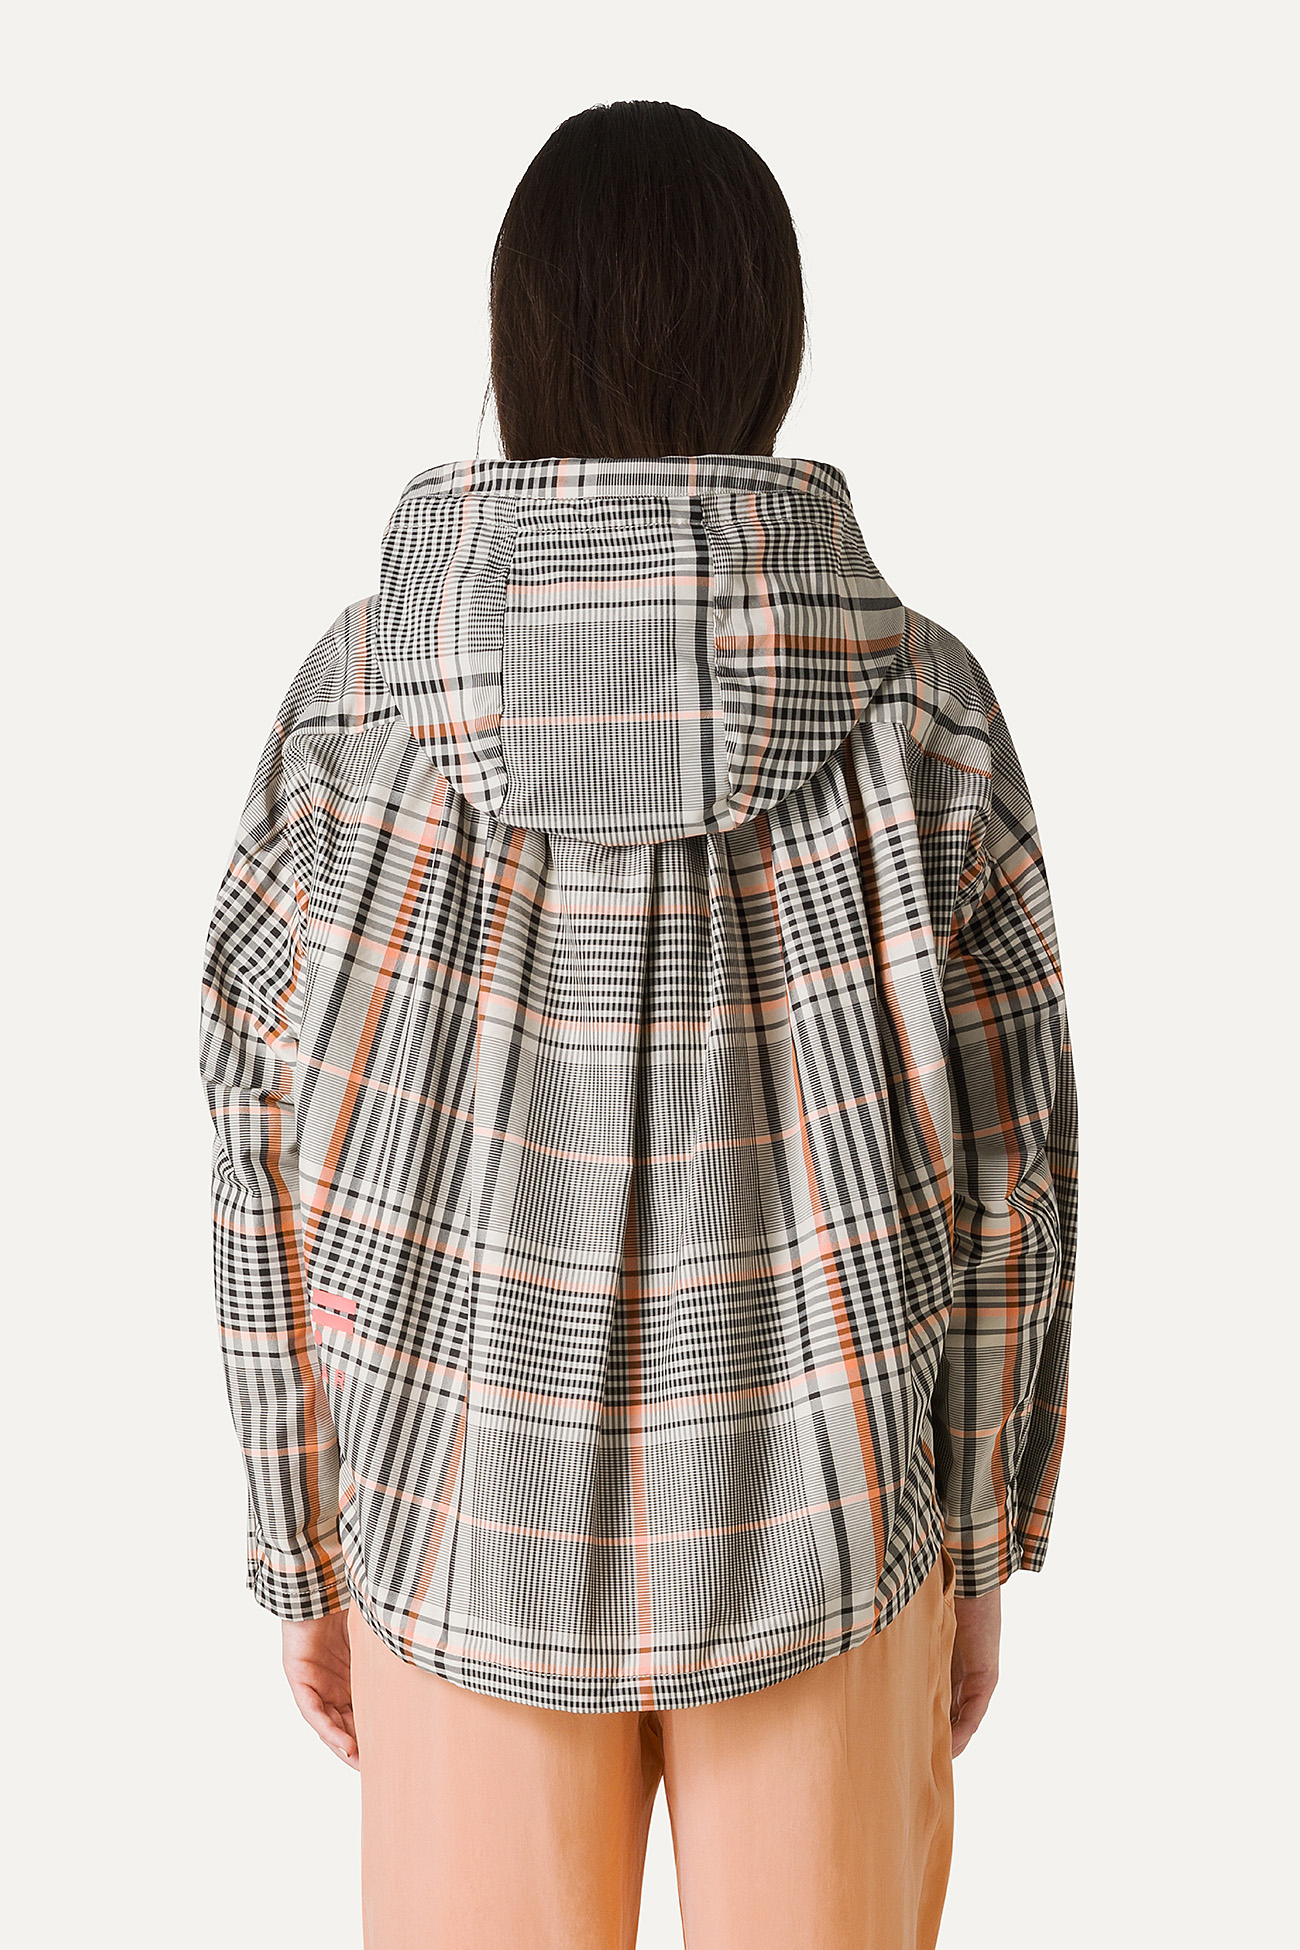 SHORT JACKET WITH GATHERED BACK IN CHECK PATTERN MEMORY NYLON 9139 - ORANGE/CREAM - OOF WEAR